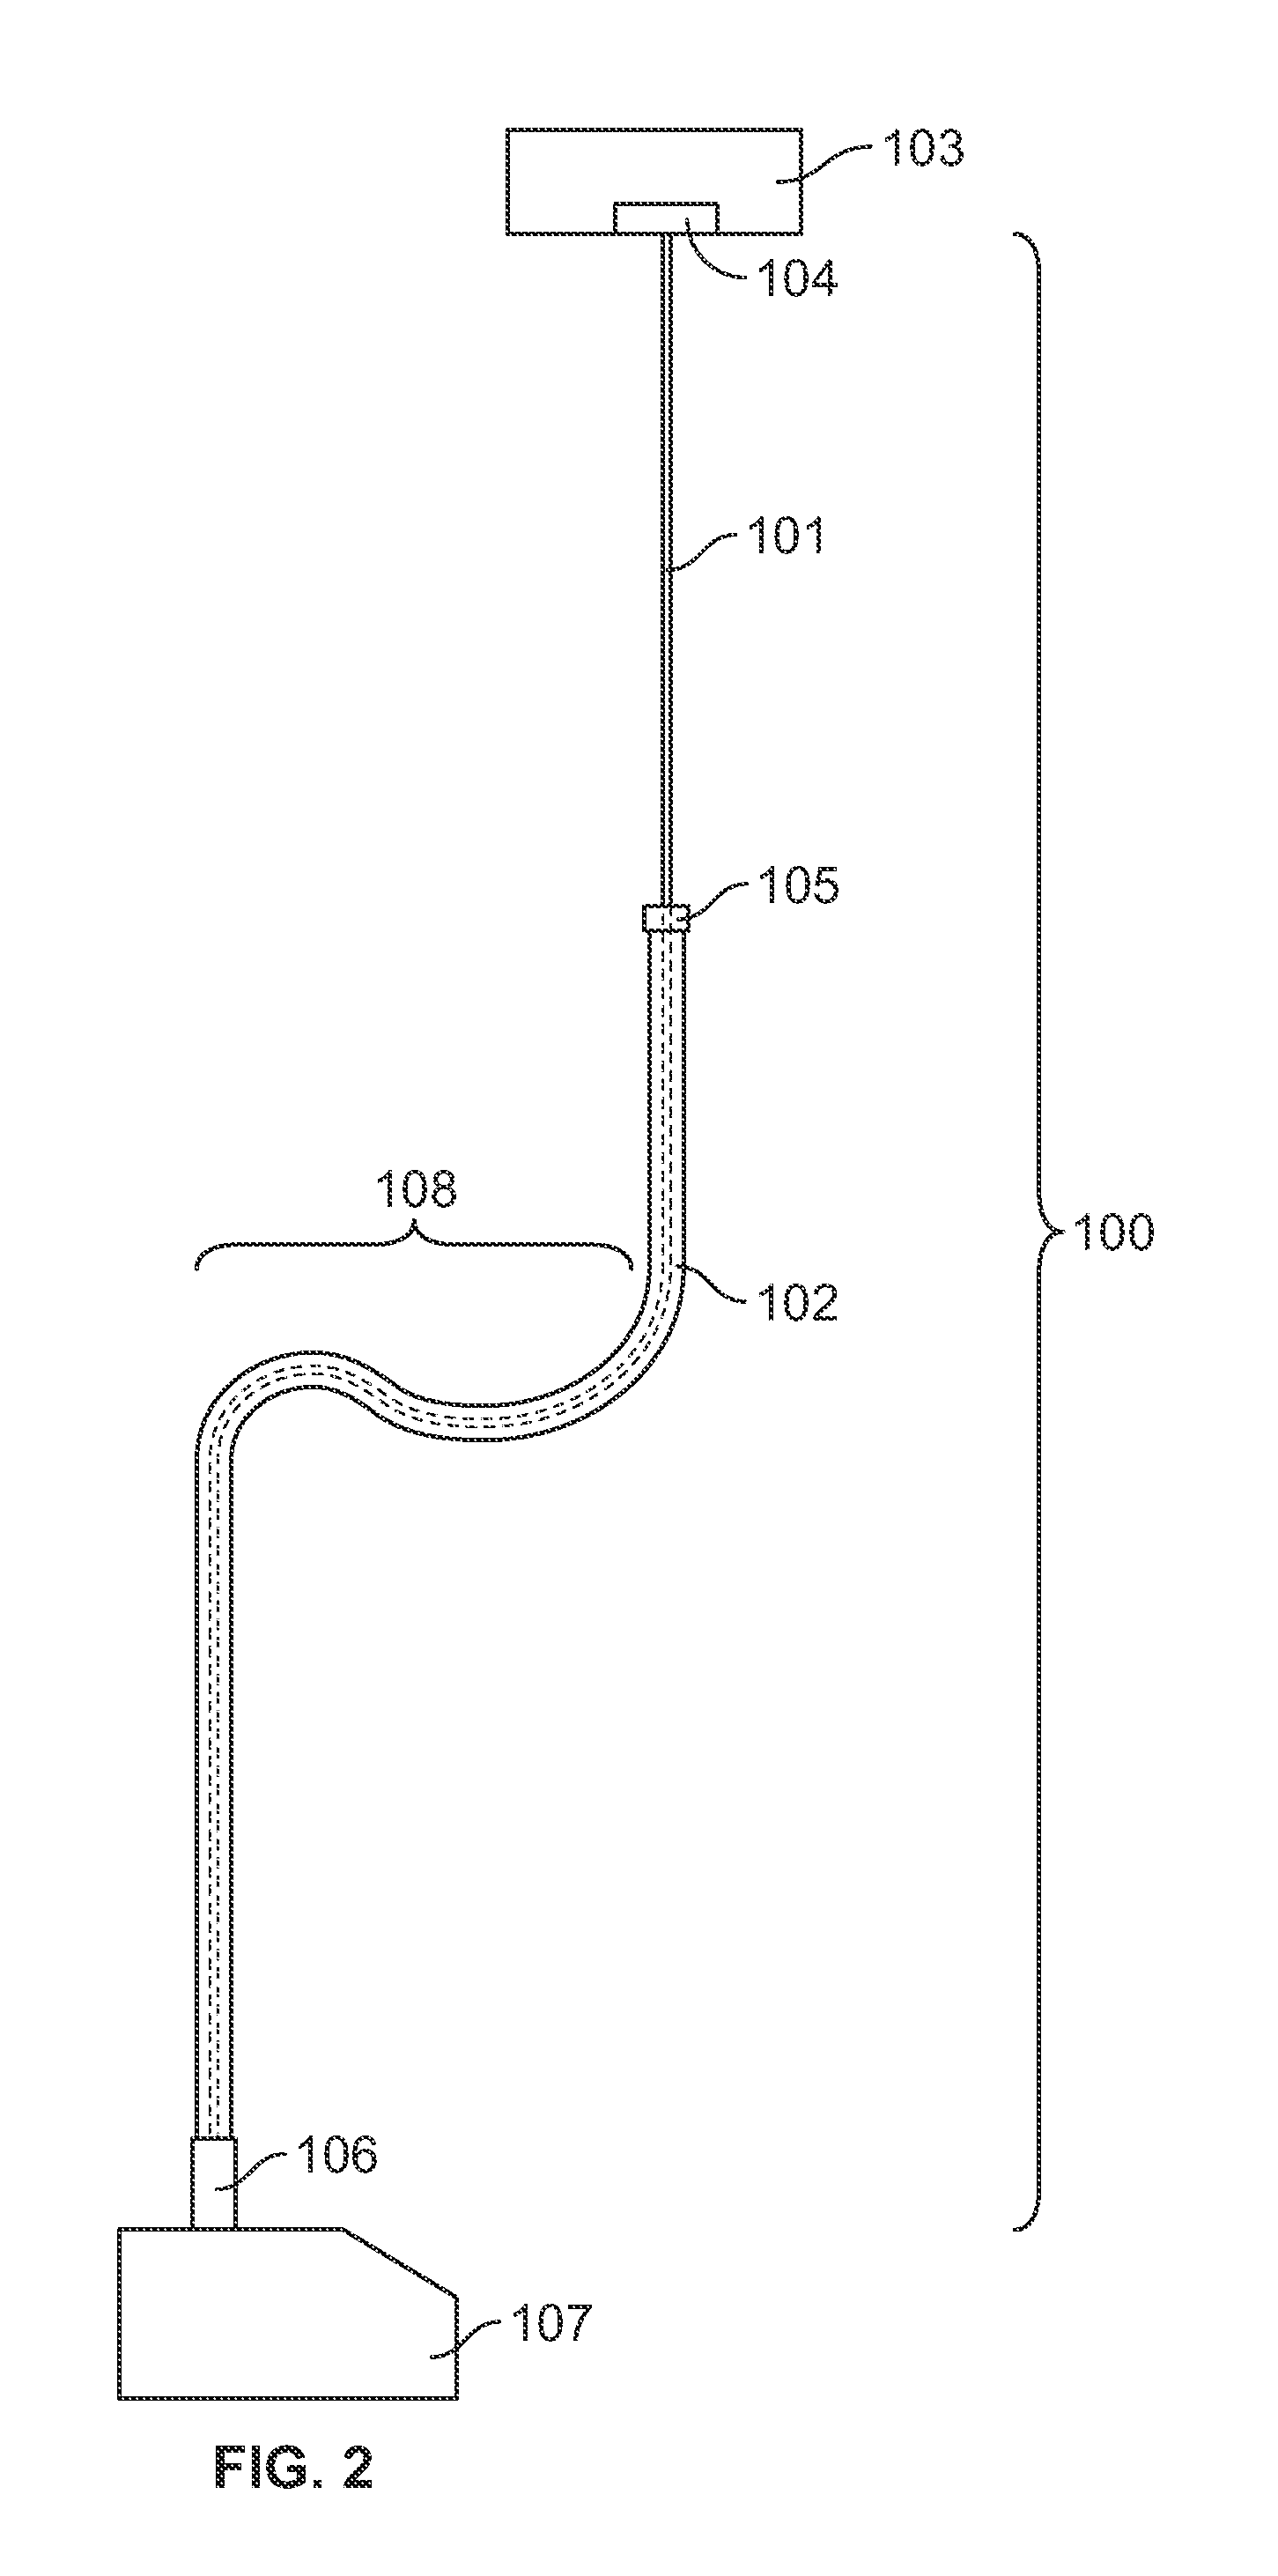 Mechanical tether system for a submersible vehicle